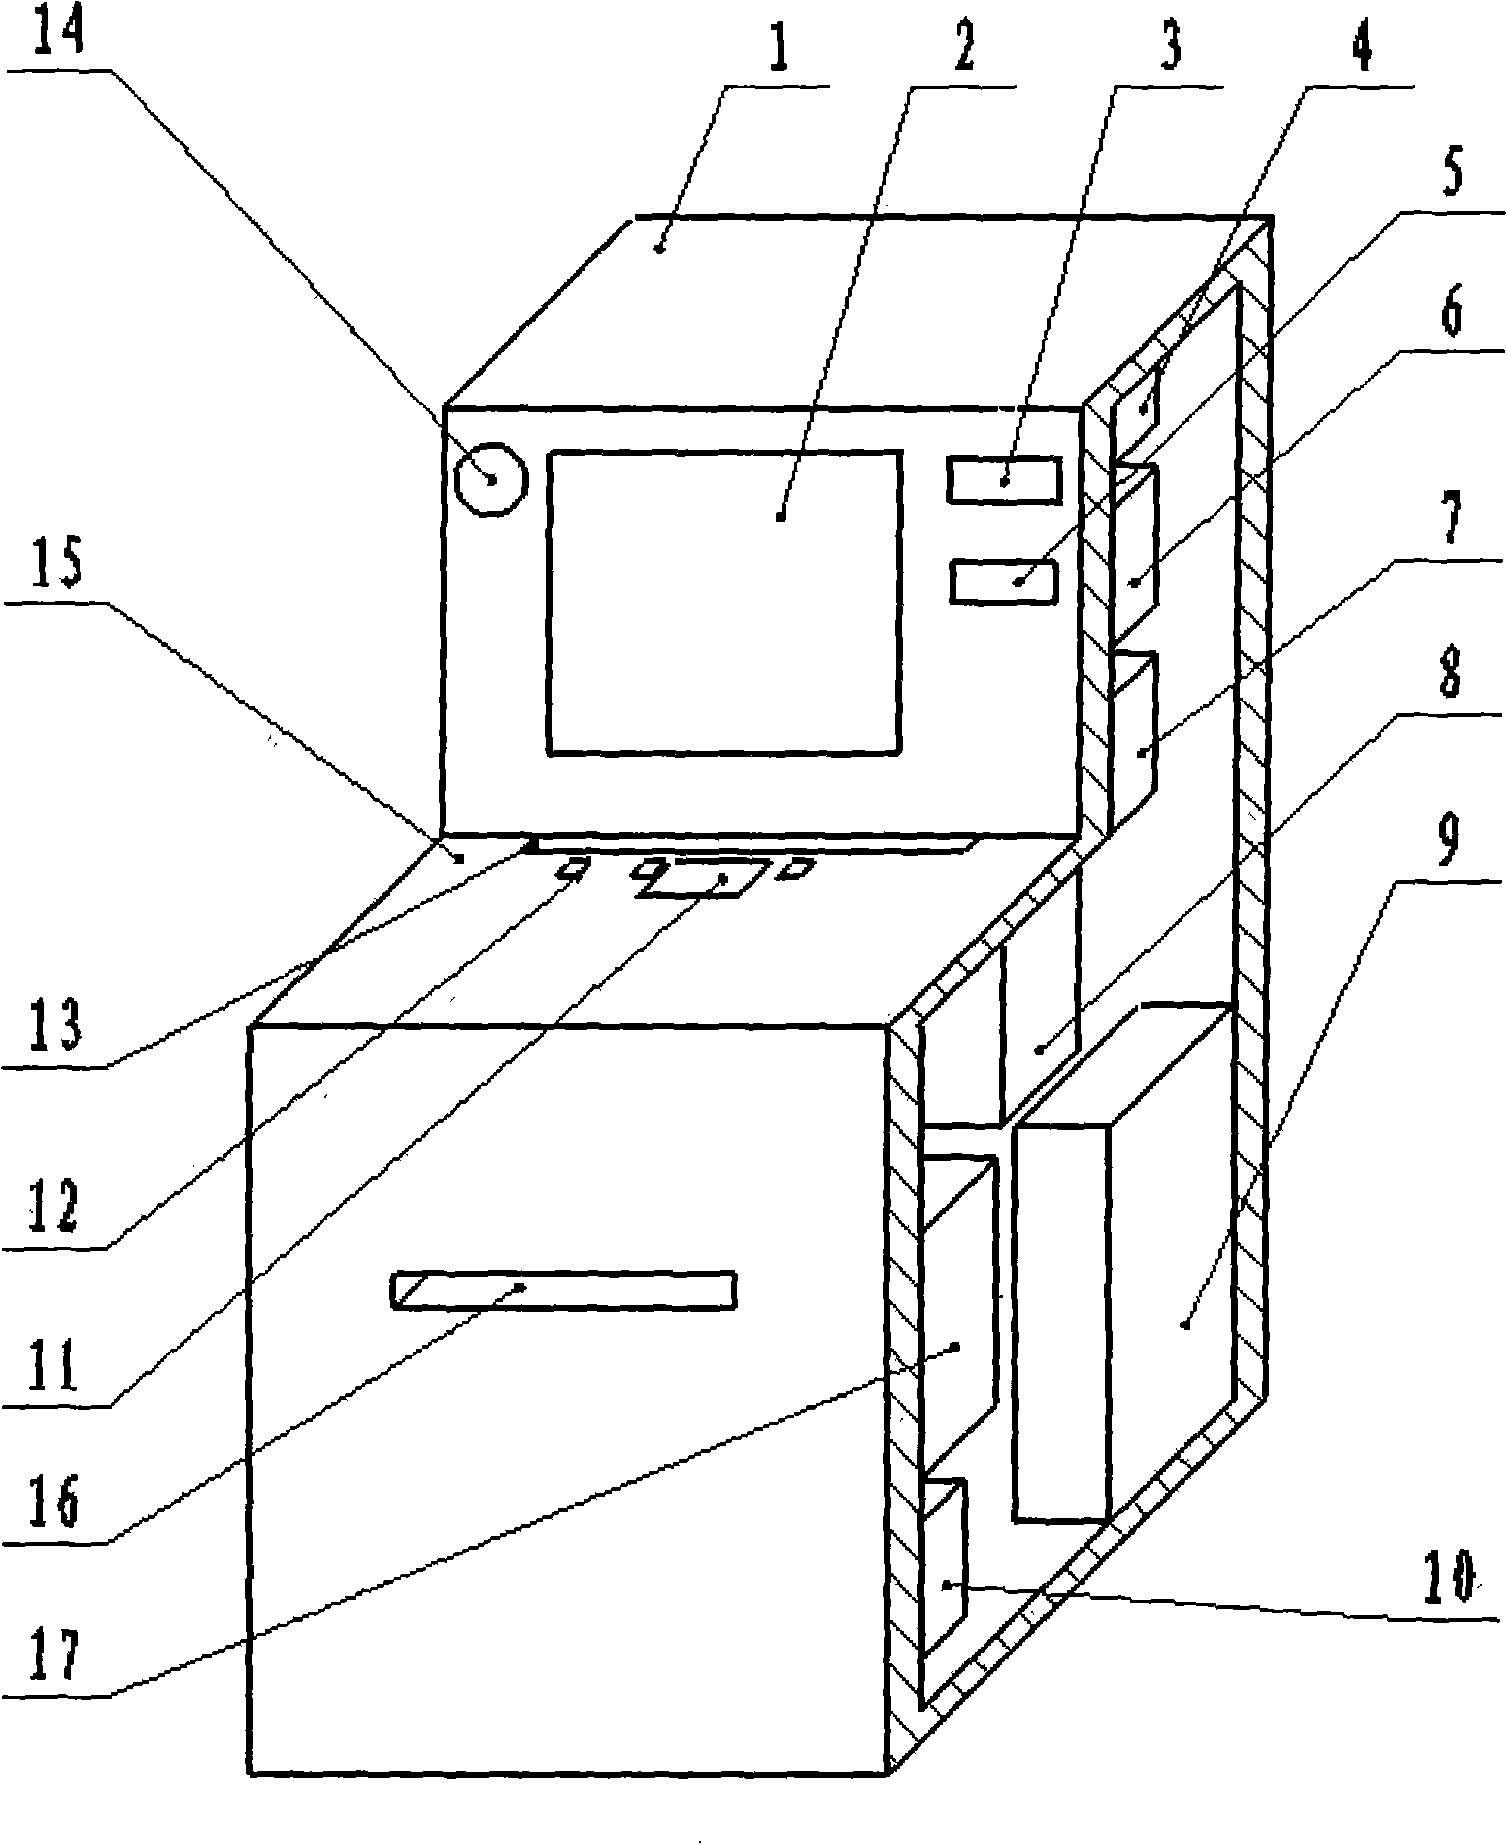 Self-help type book-borrowing and lending system and method